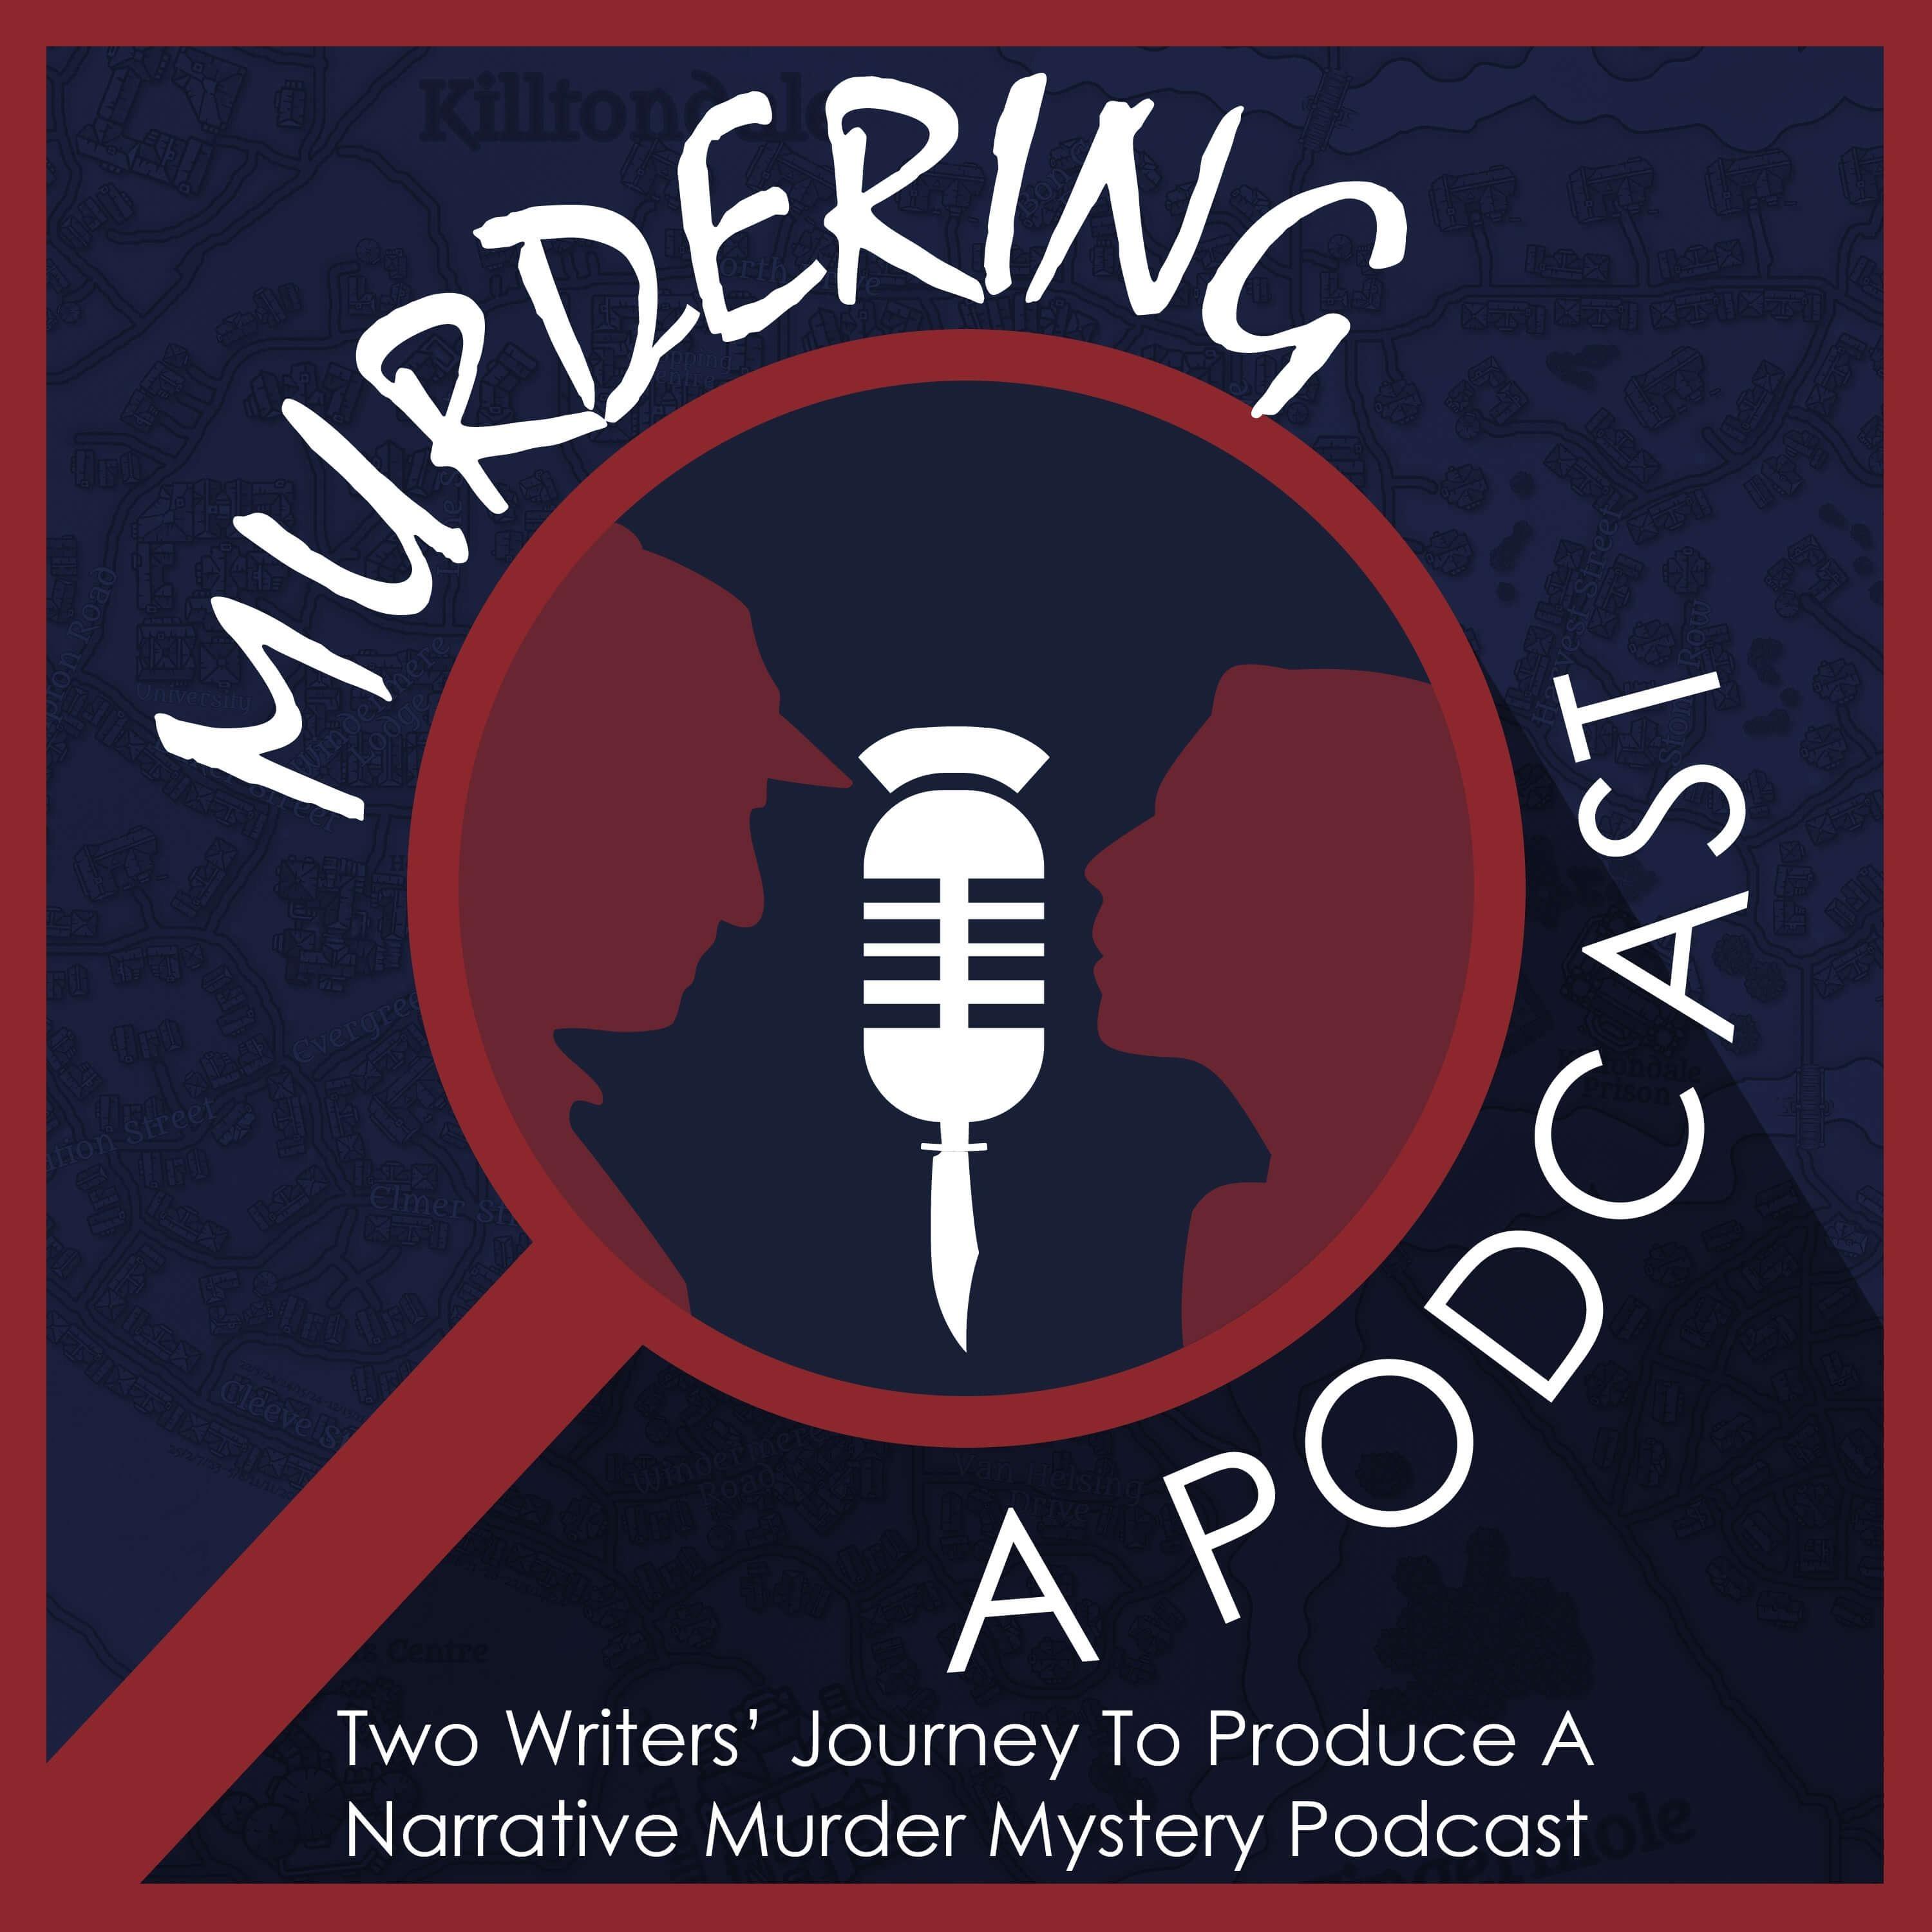 Murdering A Podcast